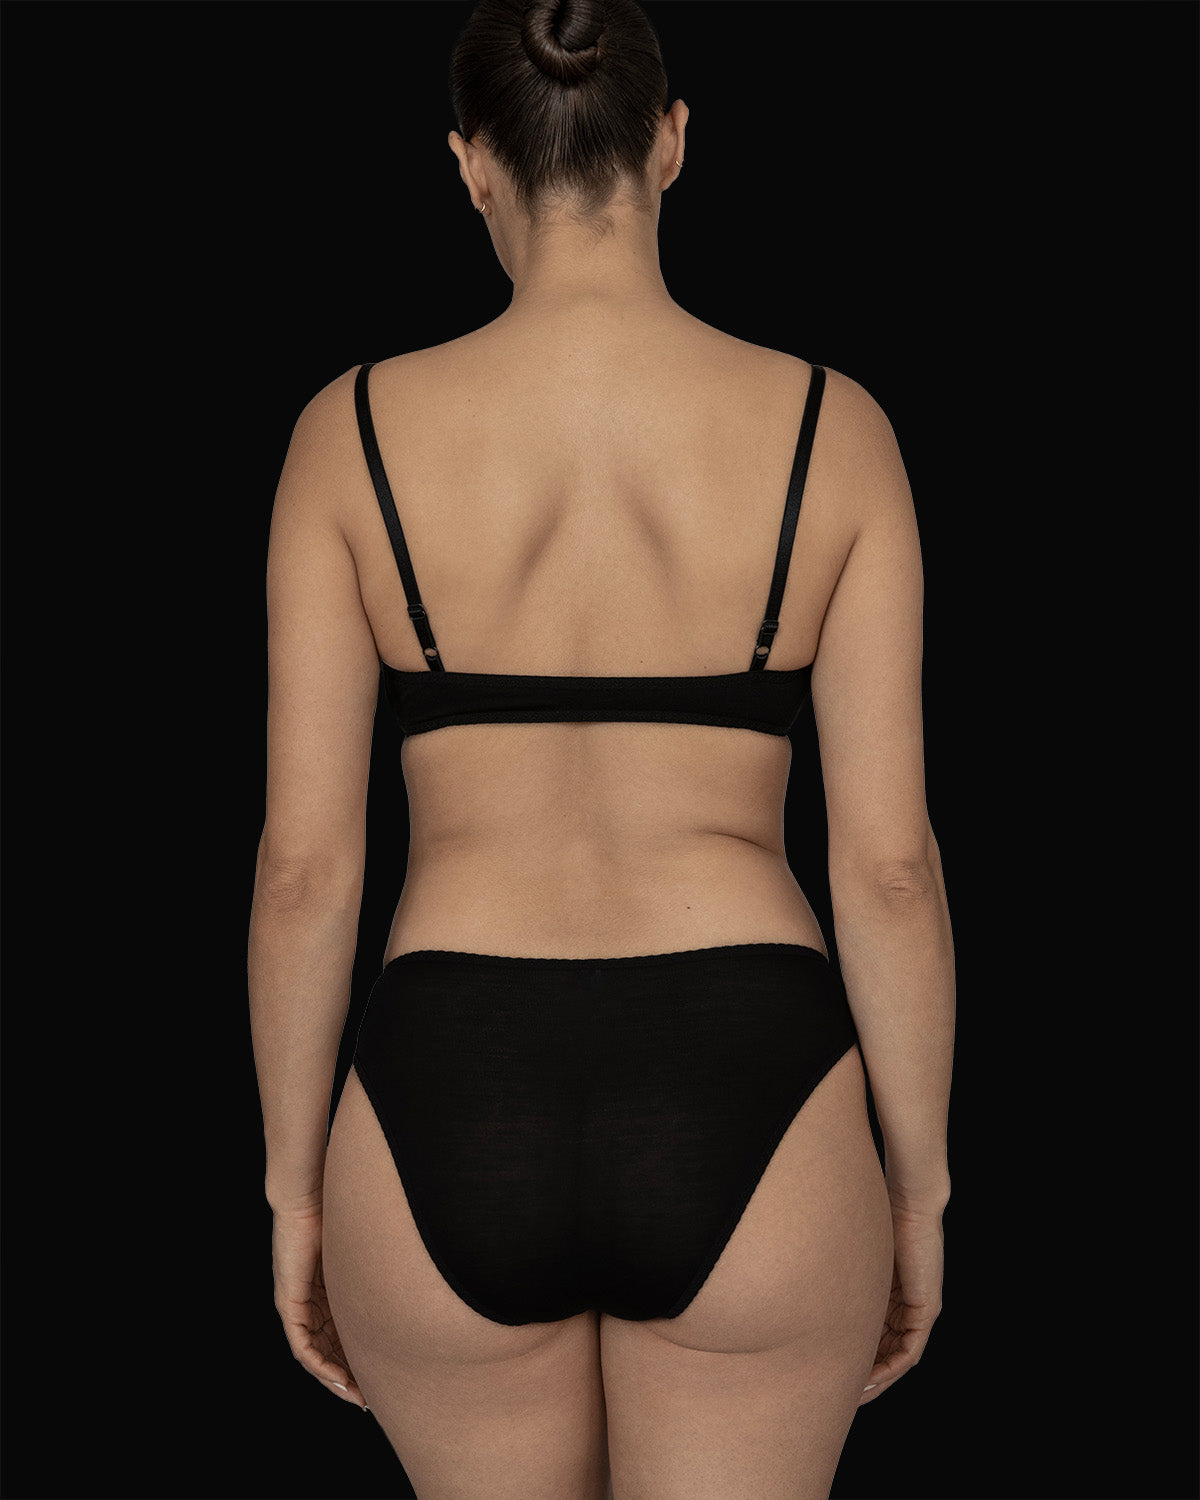 The Kye Intimates Recline Bra in the color Black. A gentle, pullover scoop neck bra, with adjustable shoulder straps. A double layered bamboo bra that is designed to provide maximum comfort.